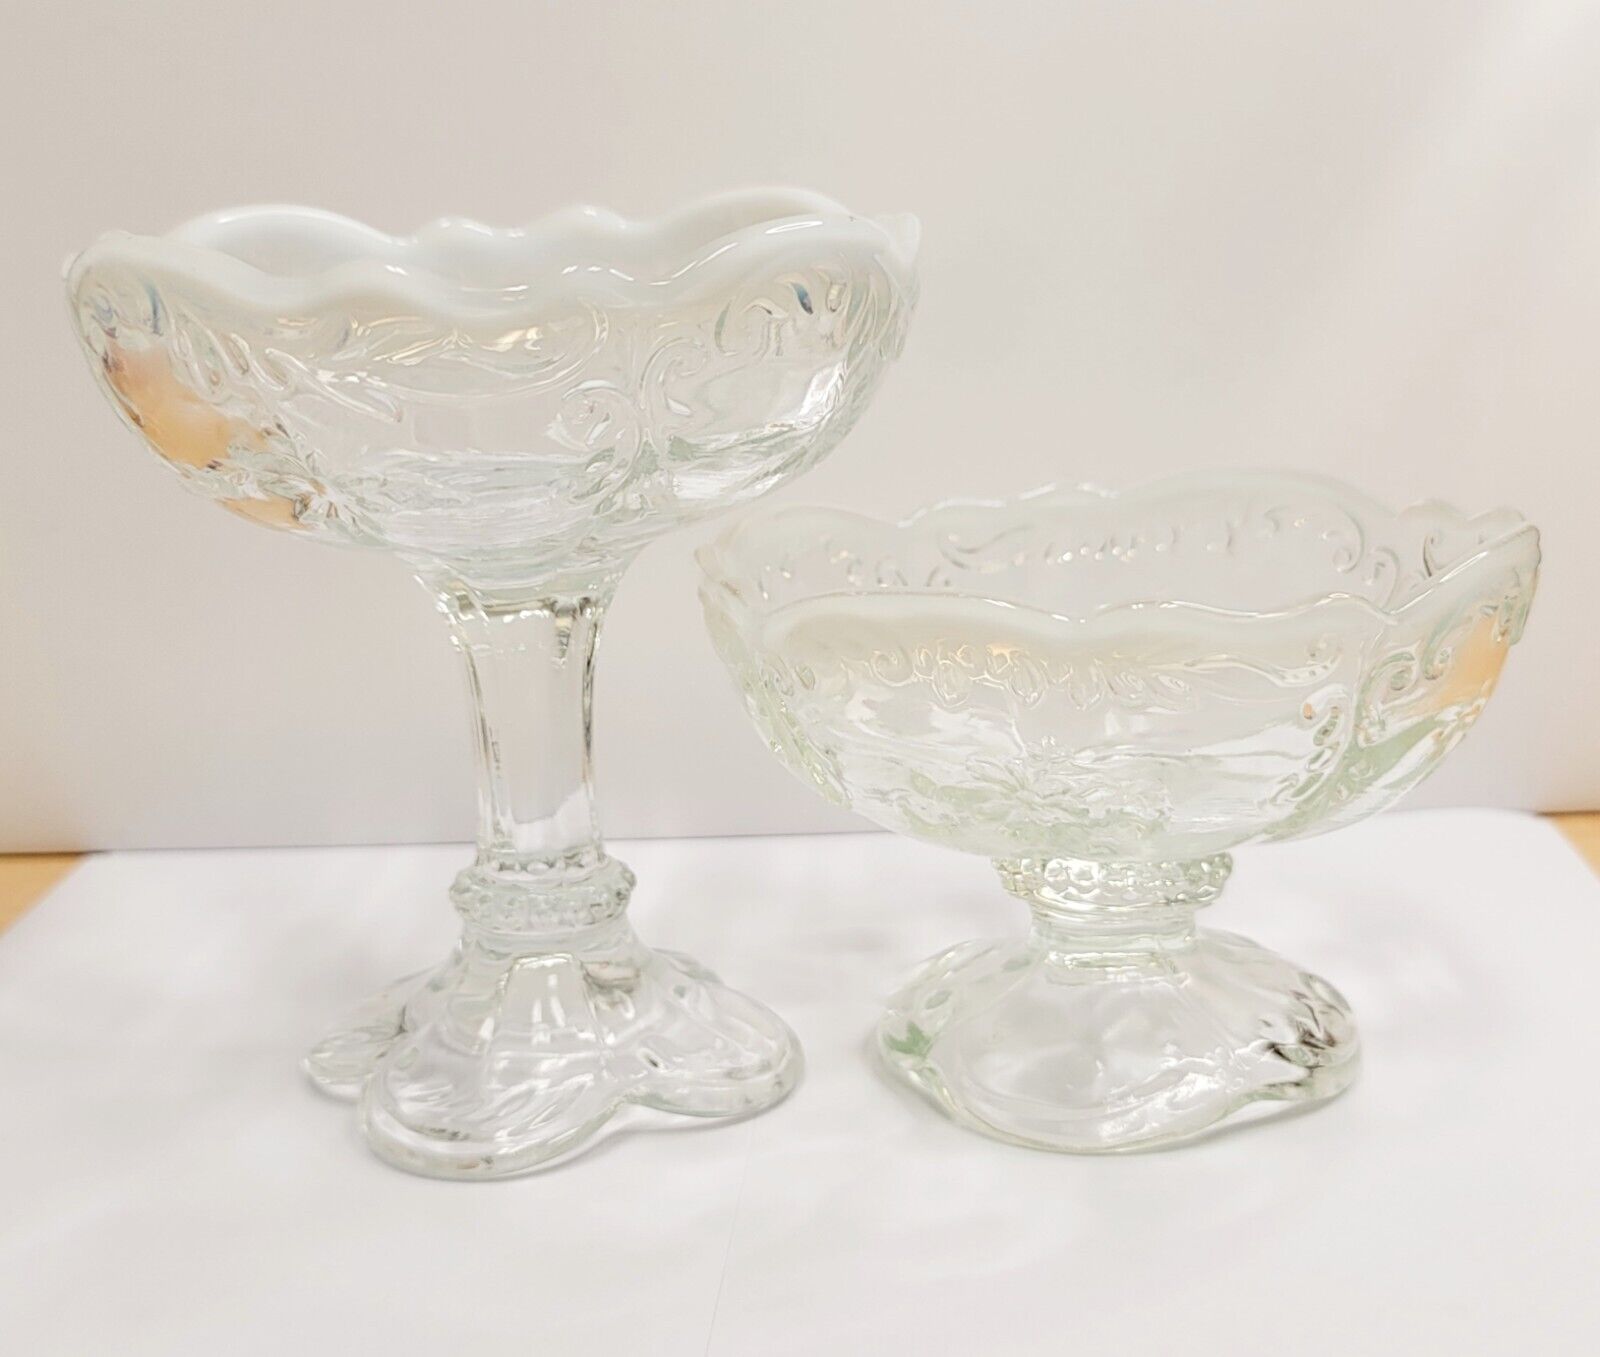 2 Antique EAPG Clear & Opalescent Northwood INTAGLIO Jelly Compotes c1894